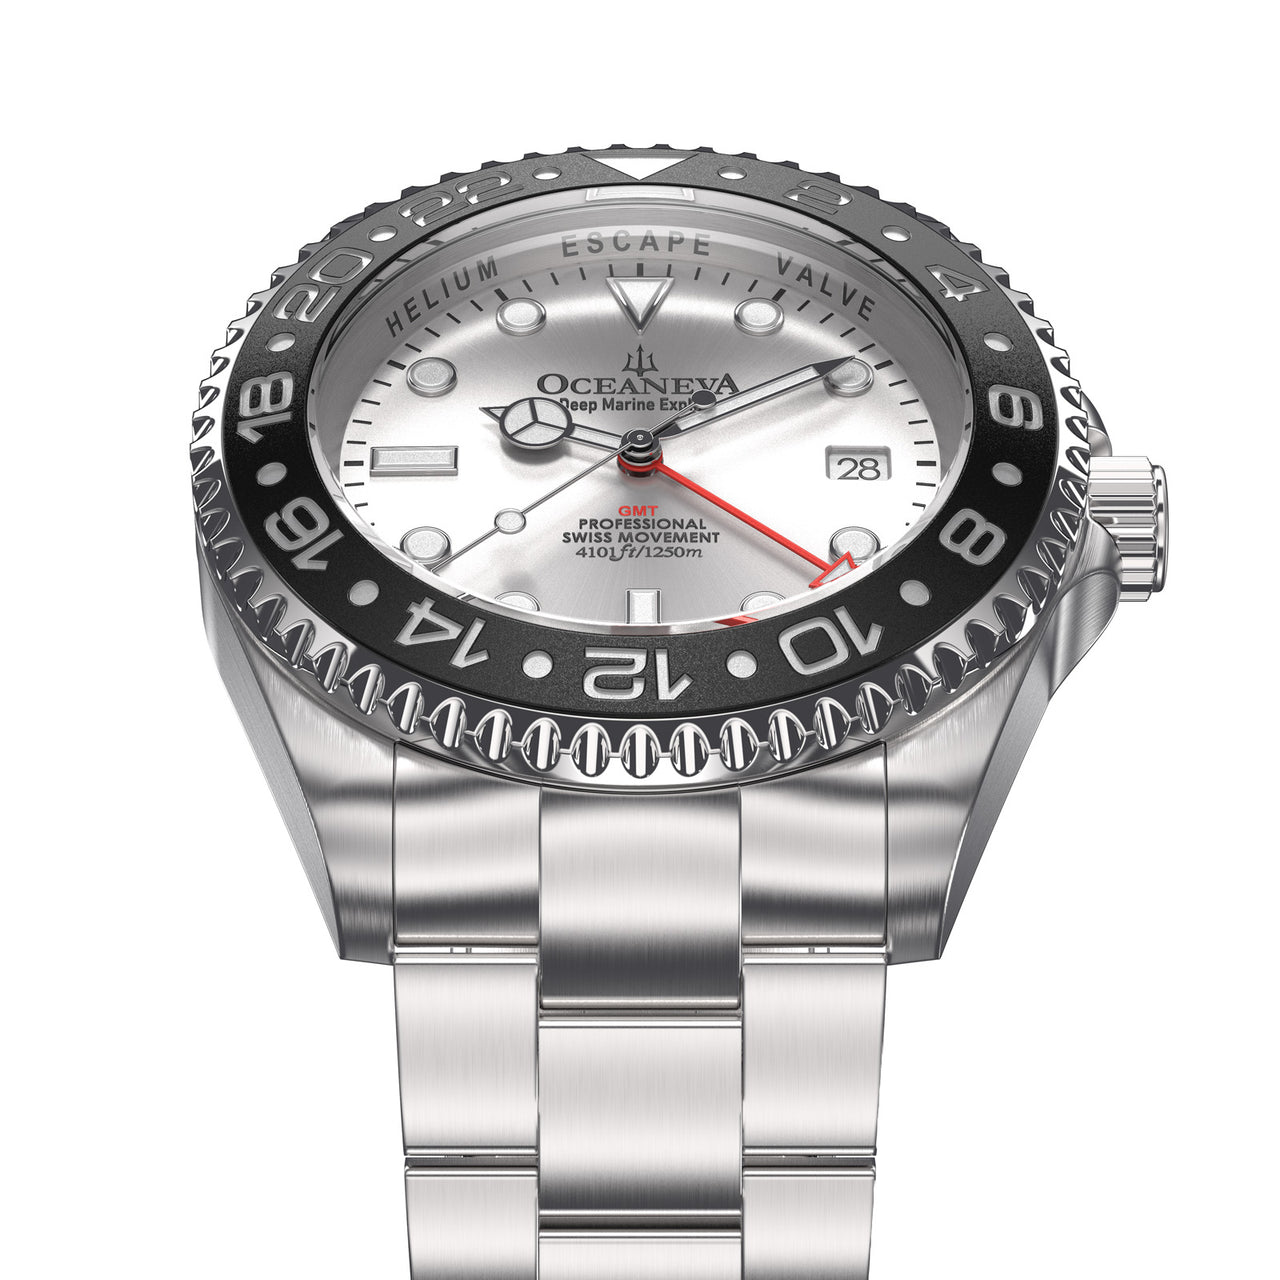 Oceaneva 1250M GMT Dive Watch Silver And Black Frontal View Picture